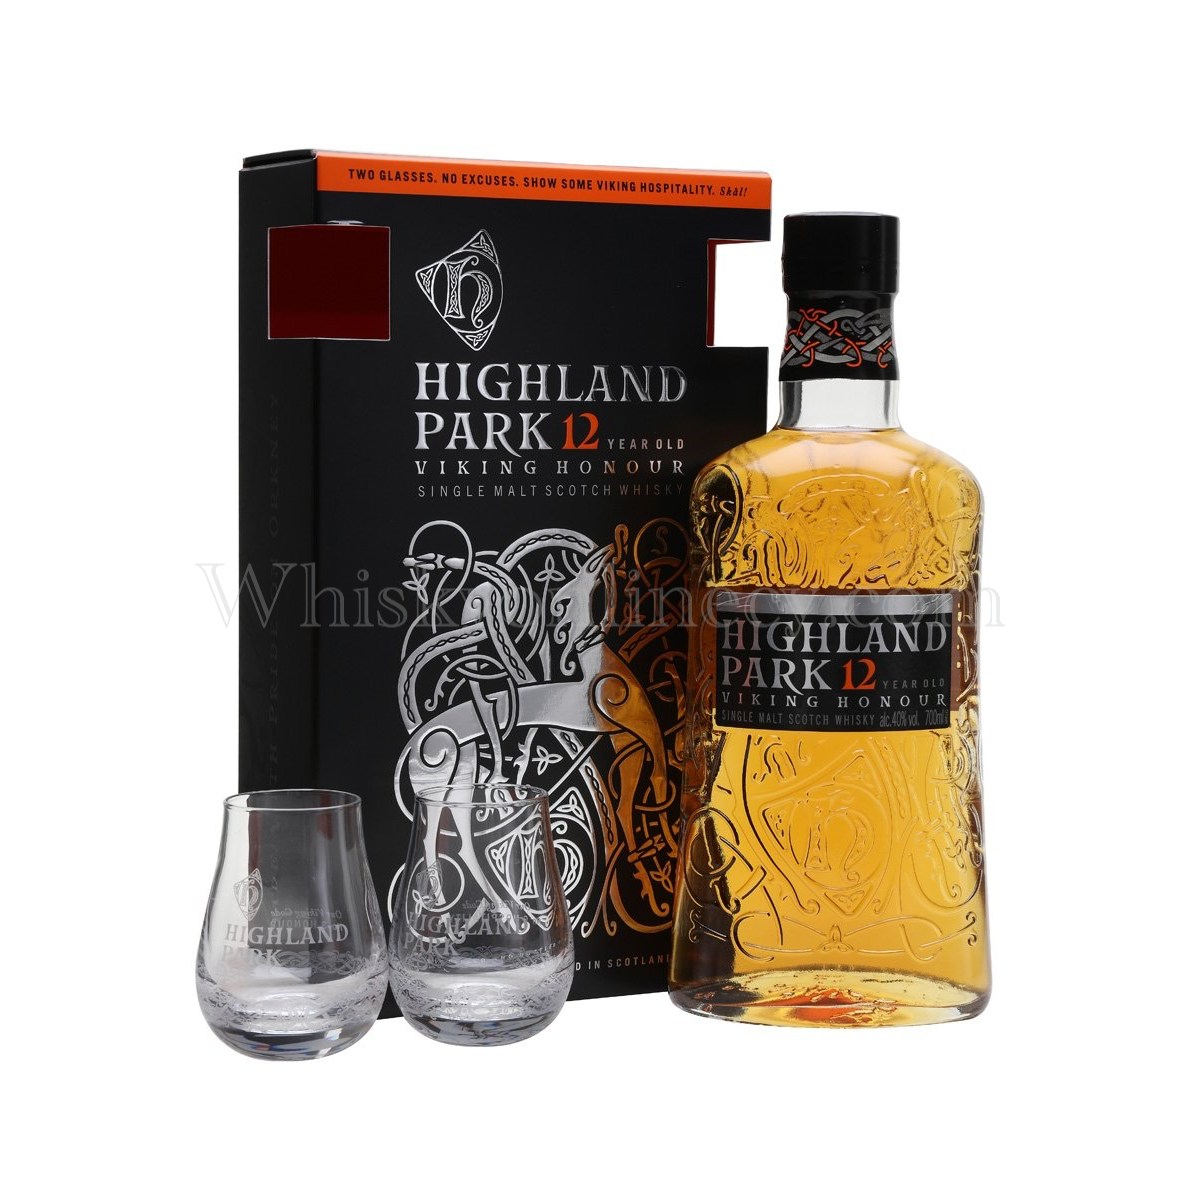 https://whiskyonlinecy.com/wp-content/uploads/2019/11/Highland-Park-12-Year-Old-Viking-Honour-Gift-Pack-70cl-40-1.png